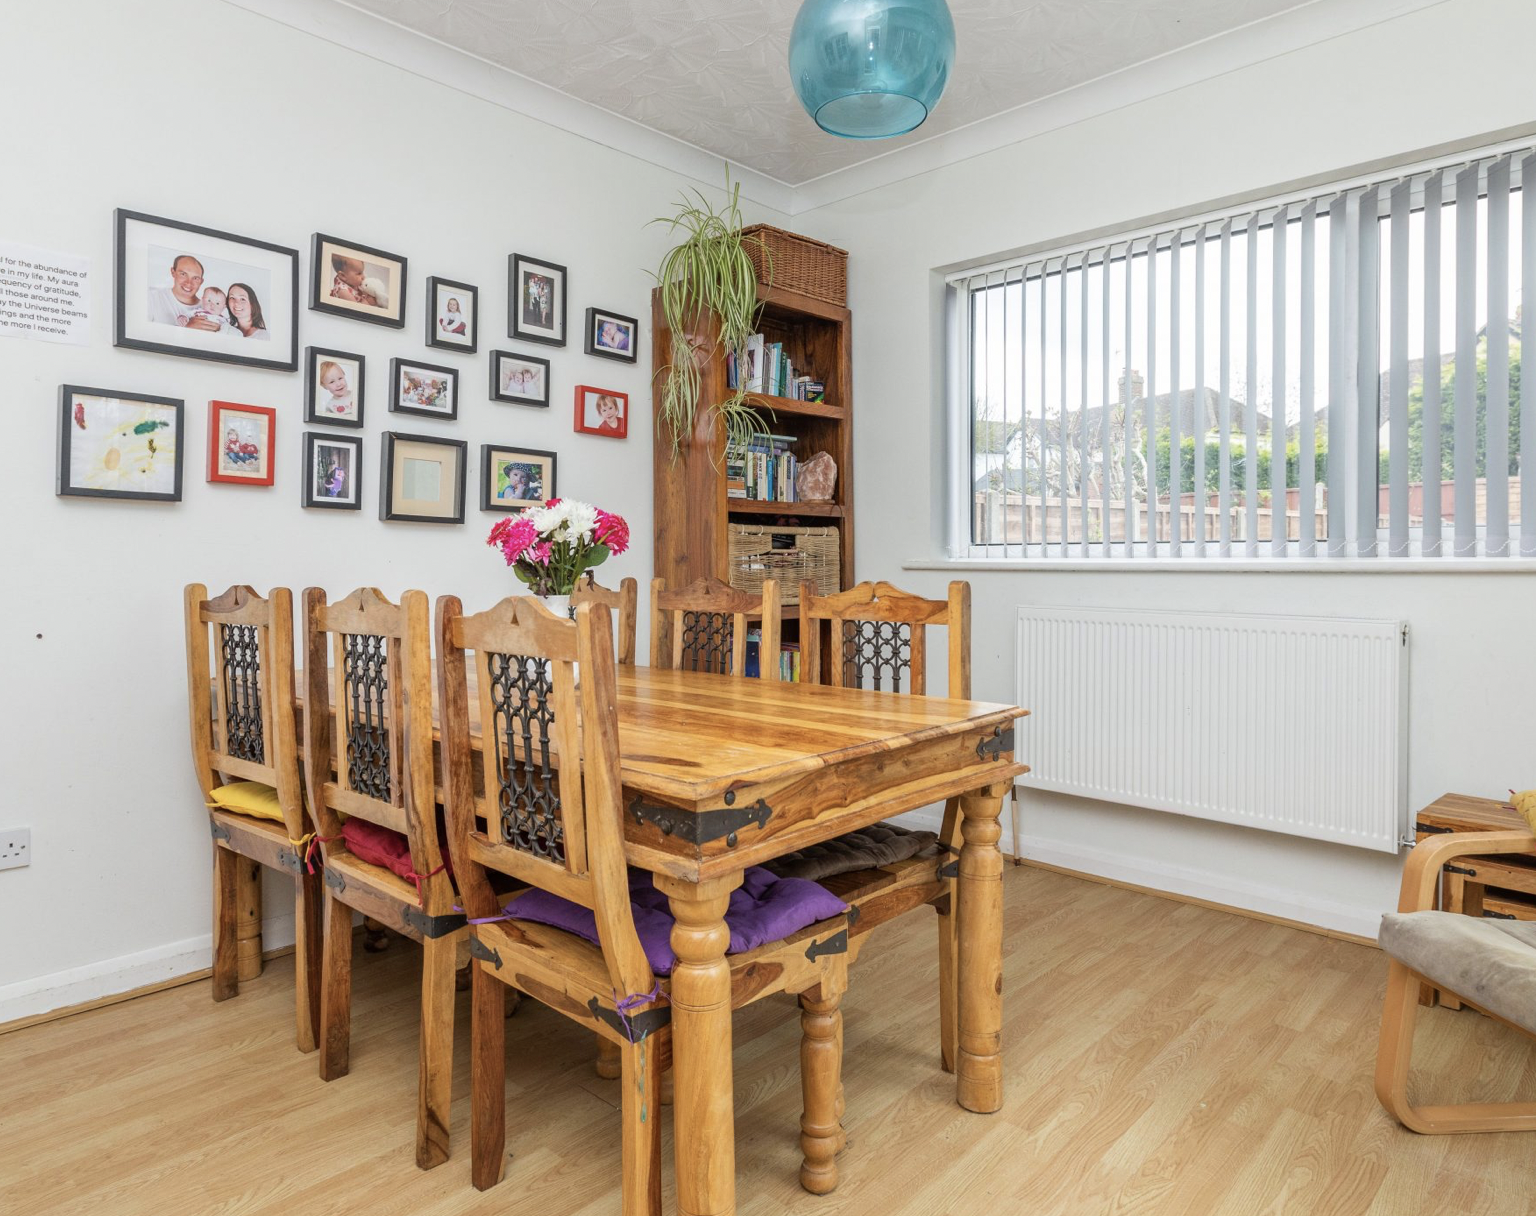 This semi-detached home has been extended to front and rear giving a very spacious ground floor with two generous reception rooms, large kitchen, and bathroom. To the first floor there are three bedrooms